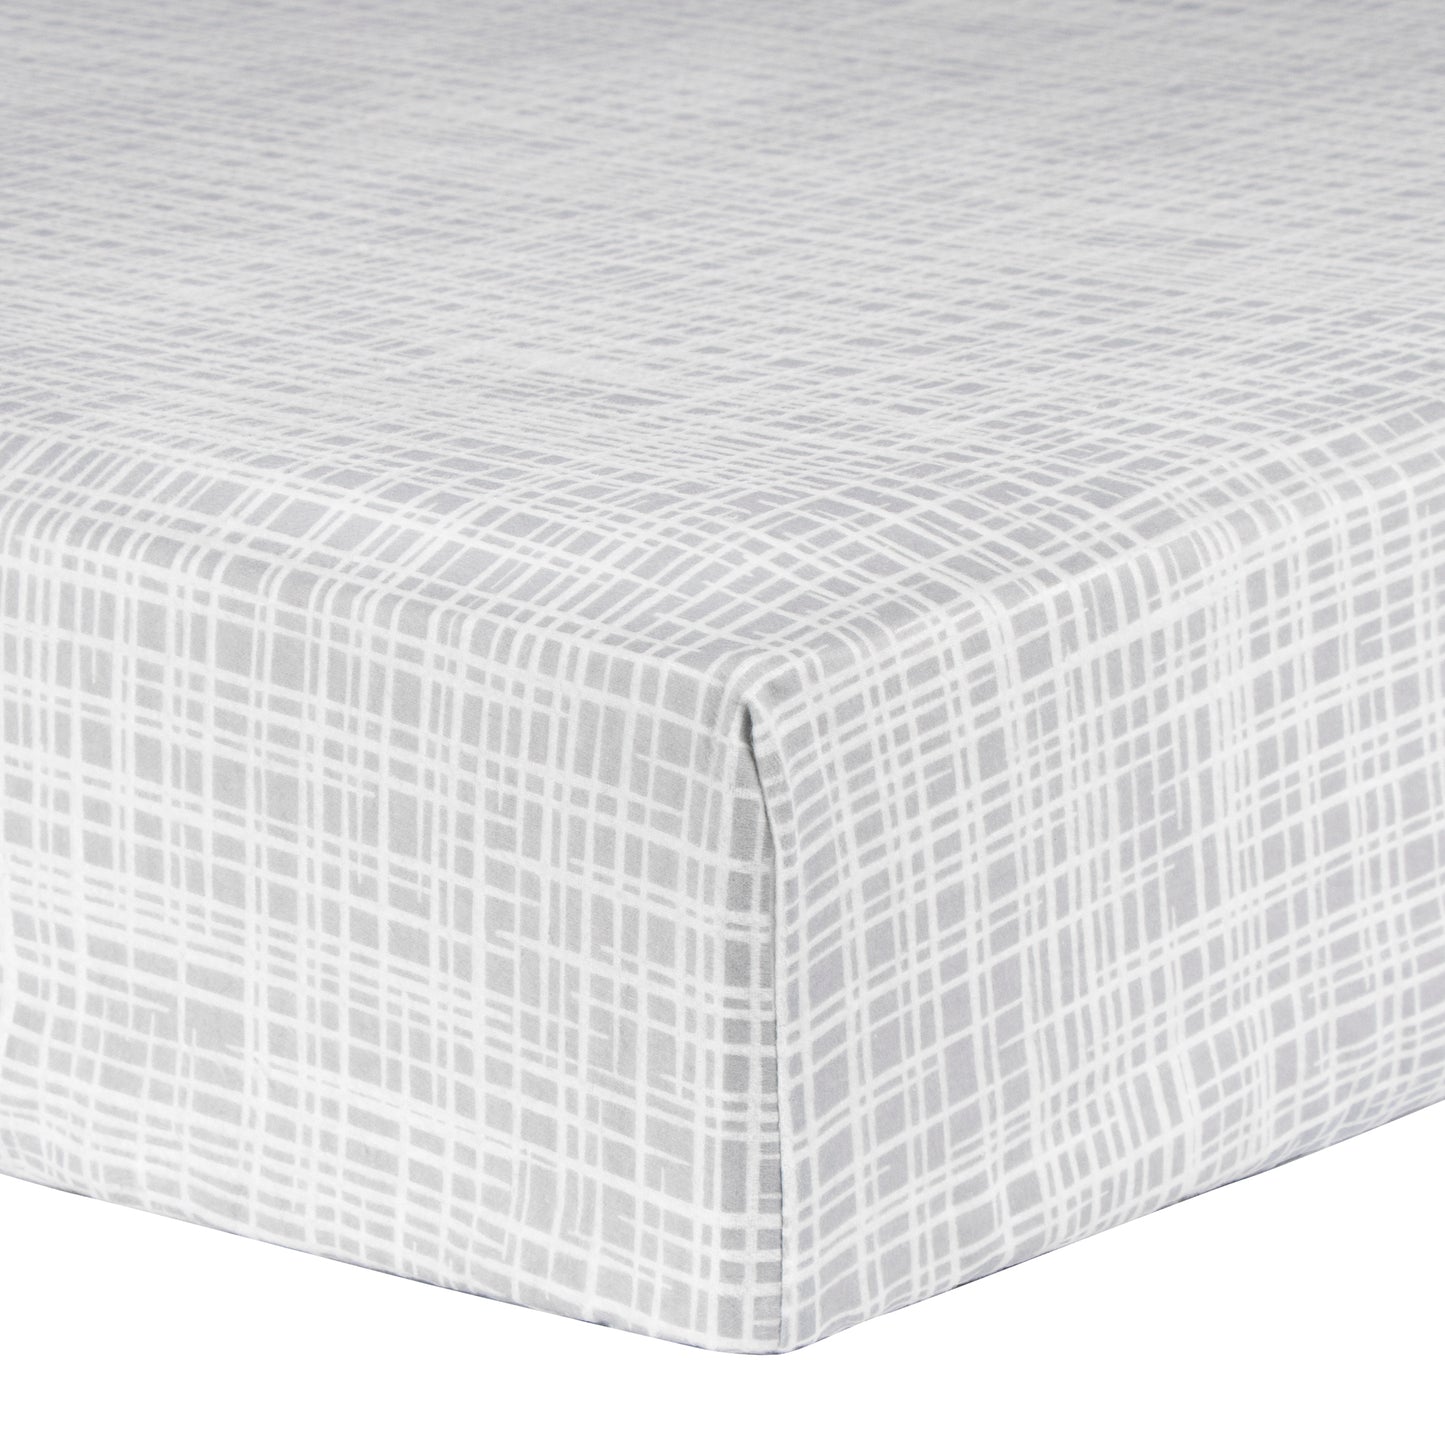 Criss Cross Deluxe Flannel Fitted Crib Sheet - corner view